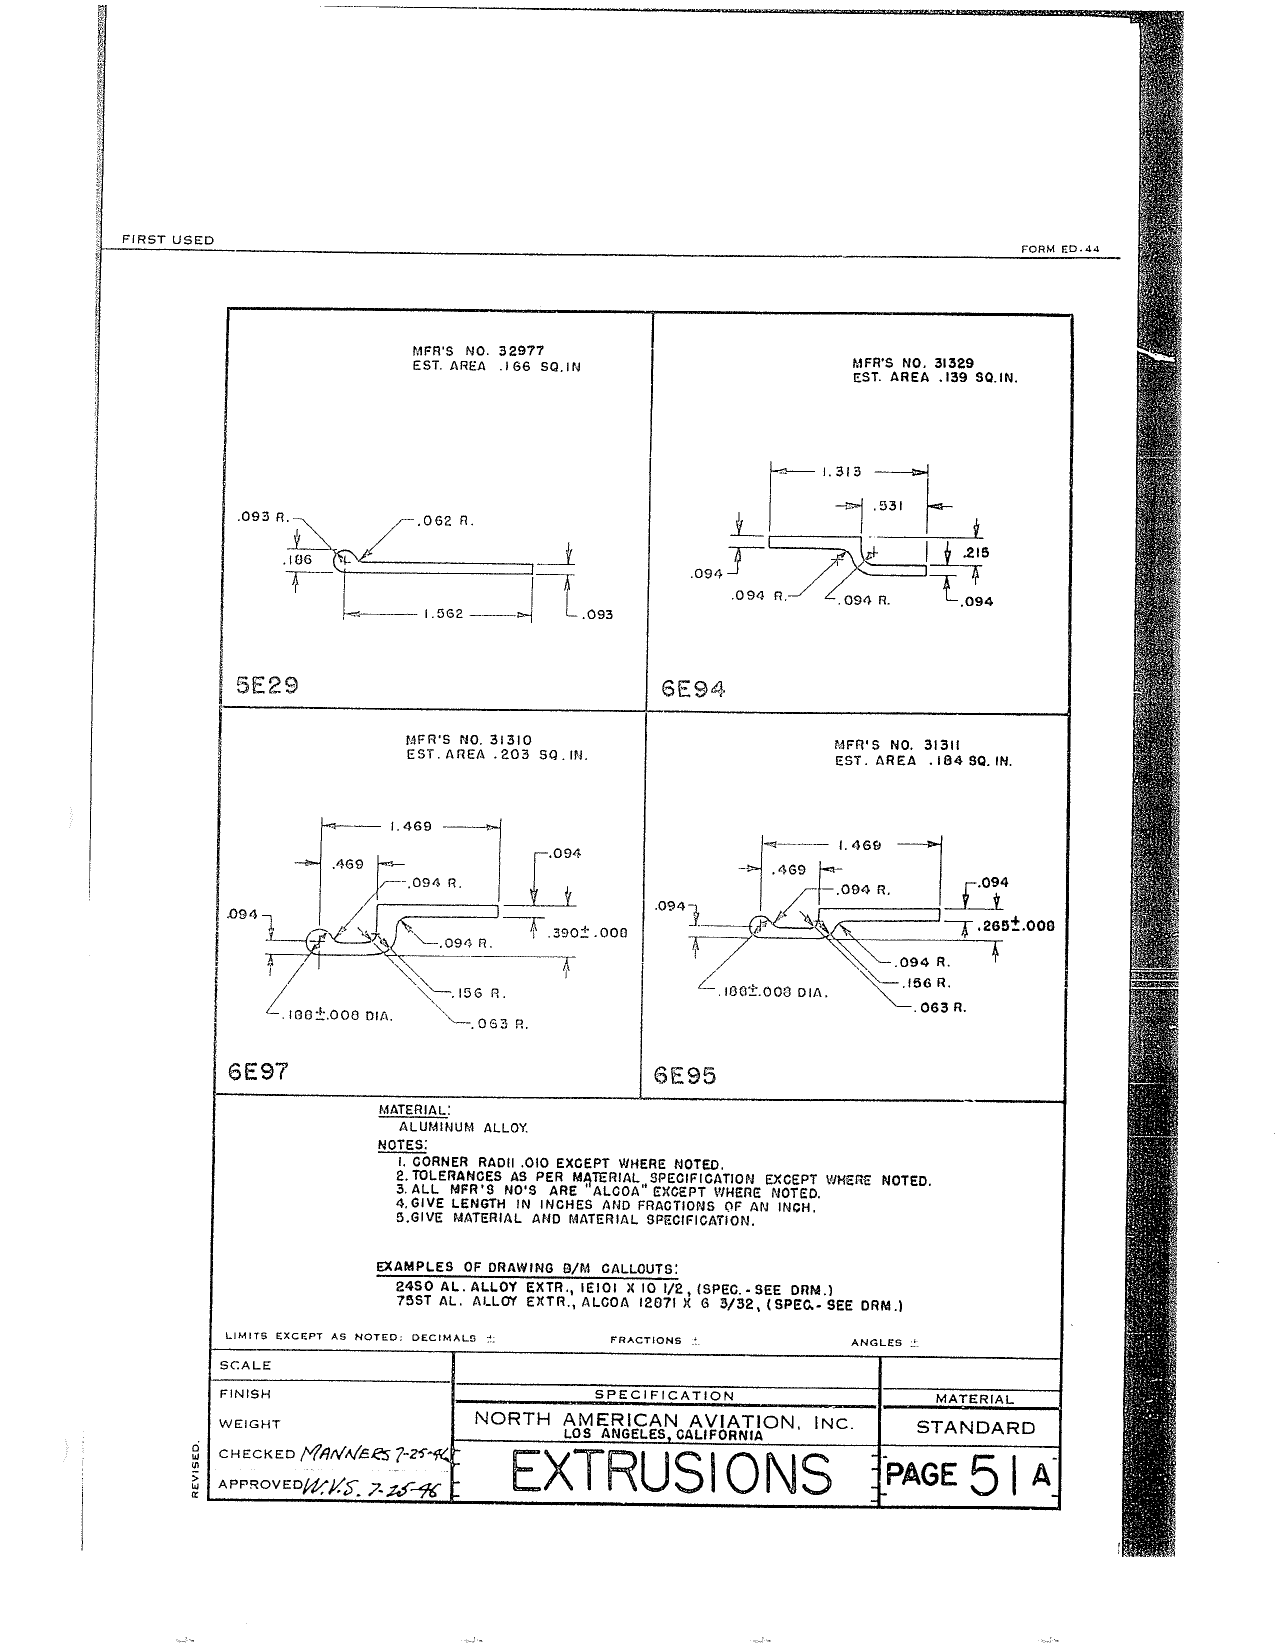 Sample page 70 from AirCorps Library document: Extrusions - North American Aviation